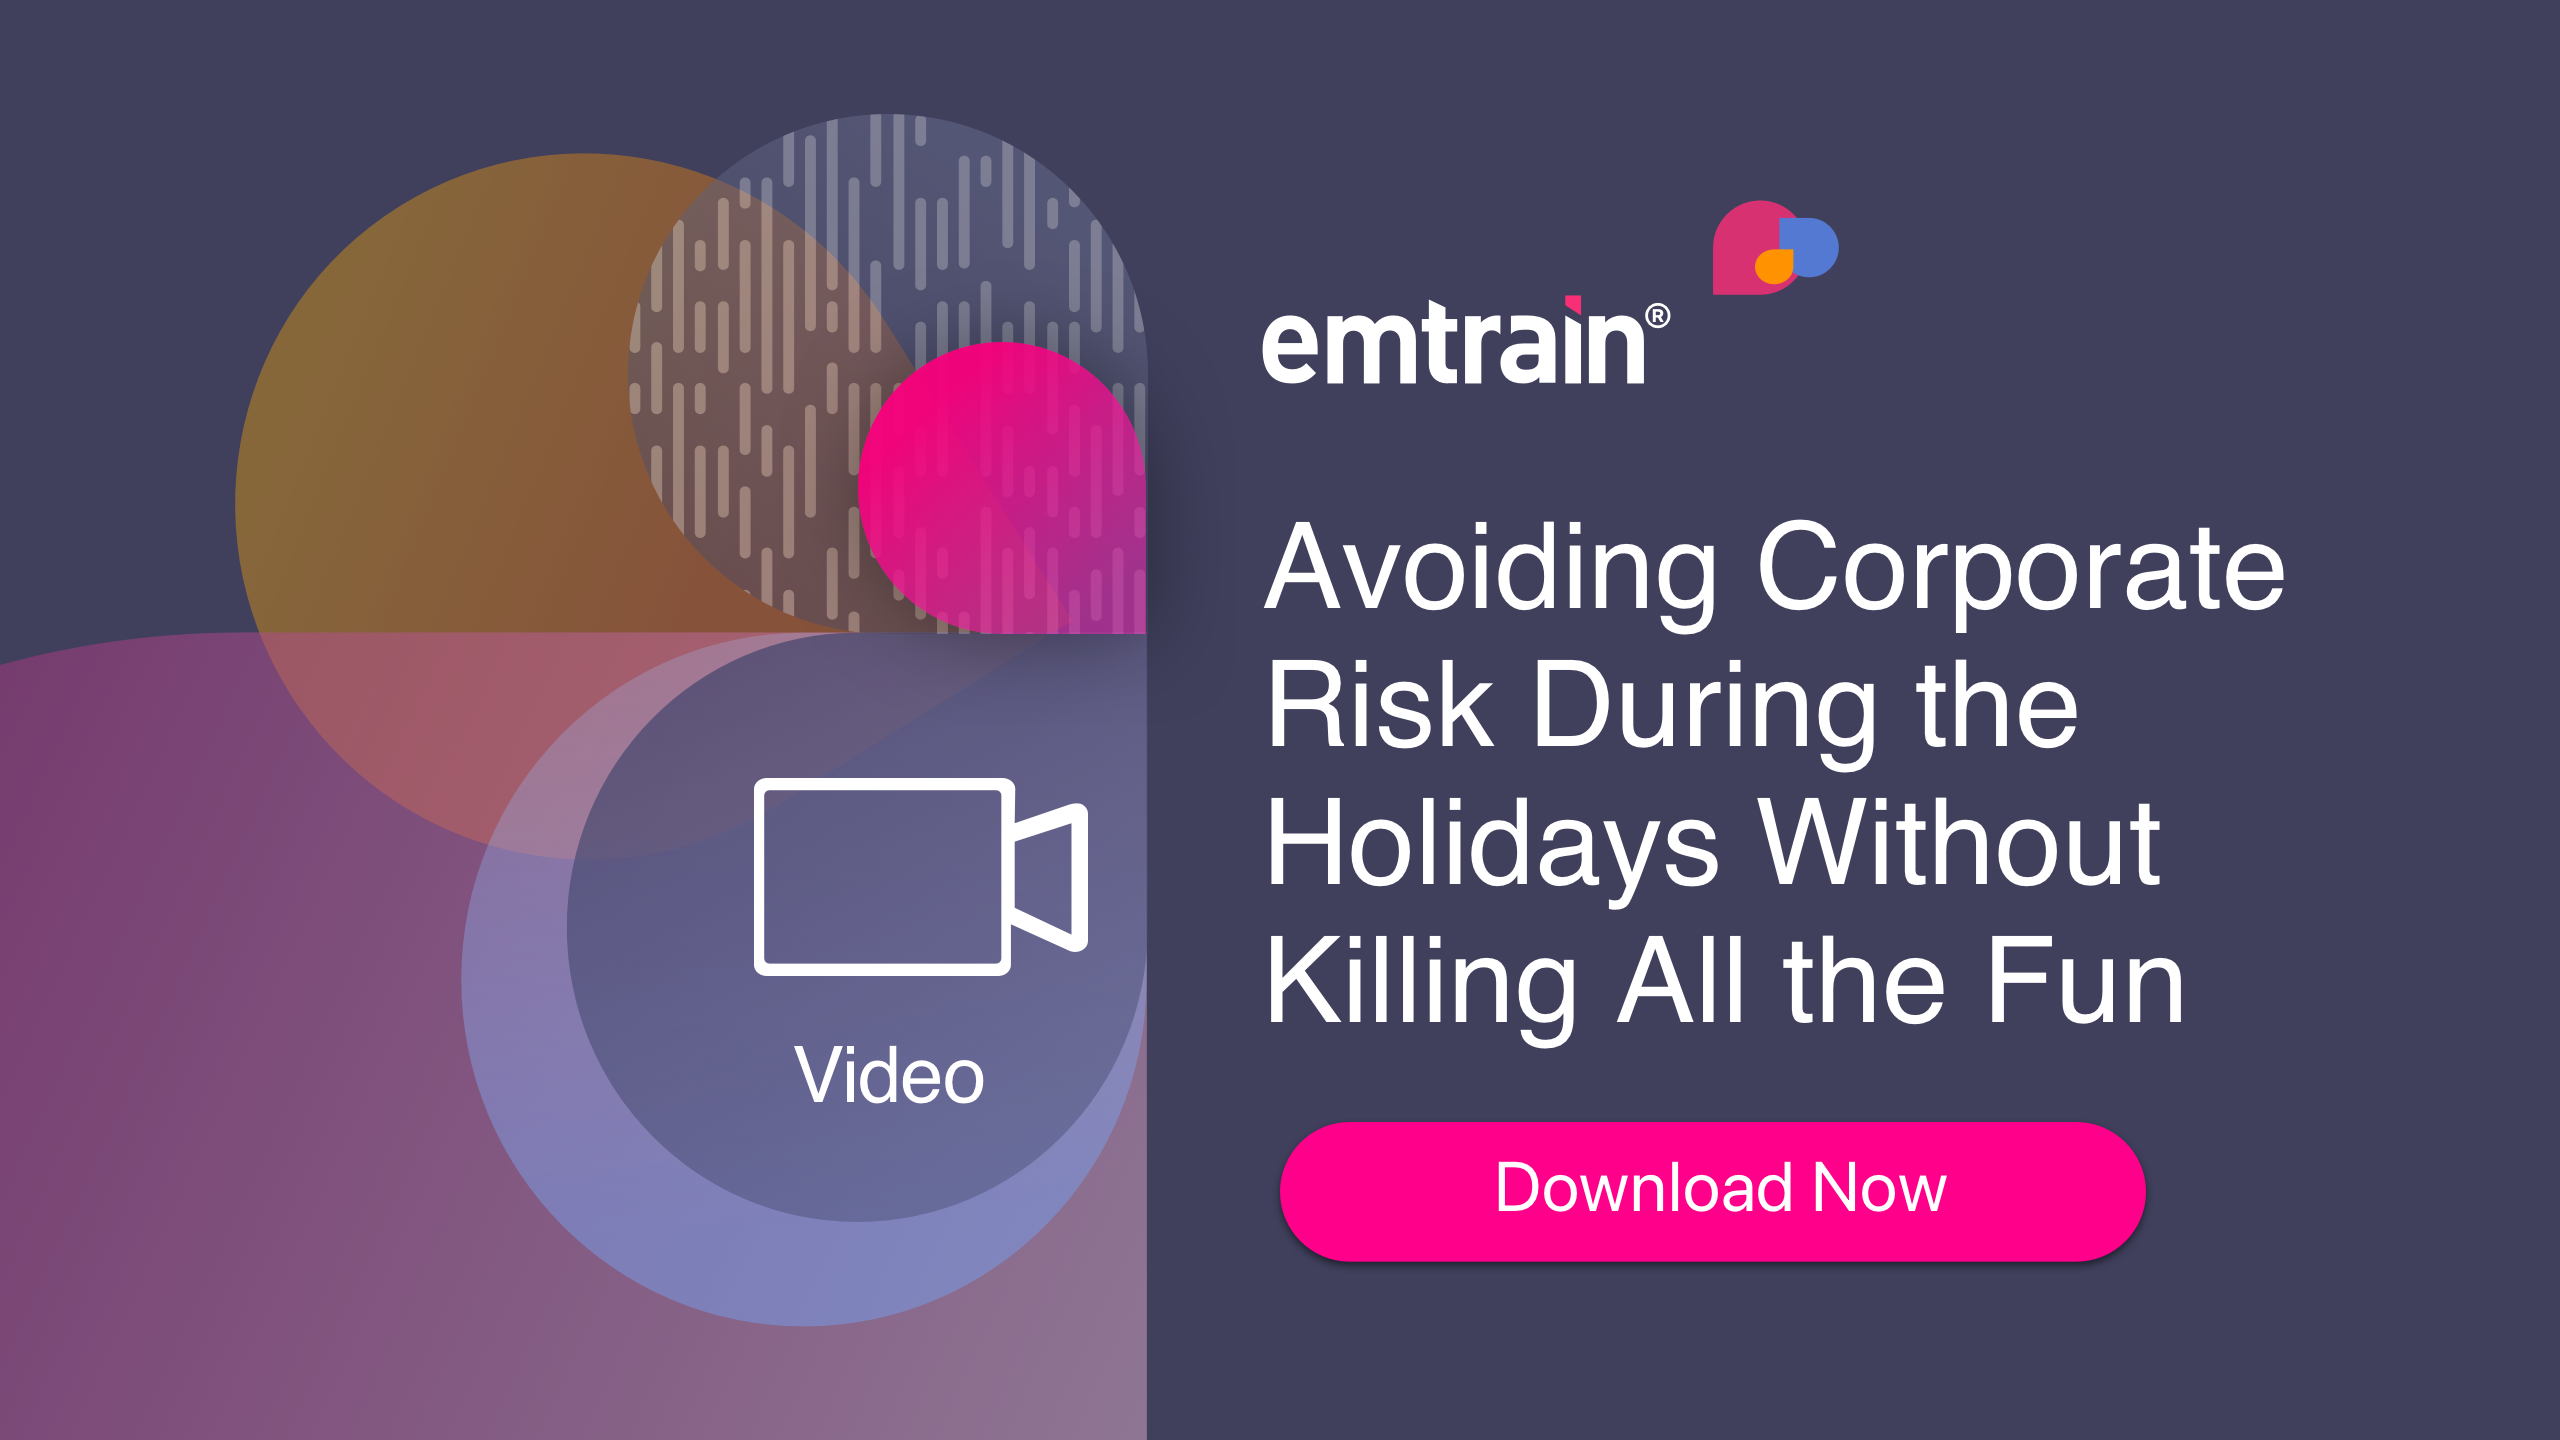 Avoiding Corporate Risk During the Holidays Without Killing All the Fun